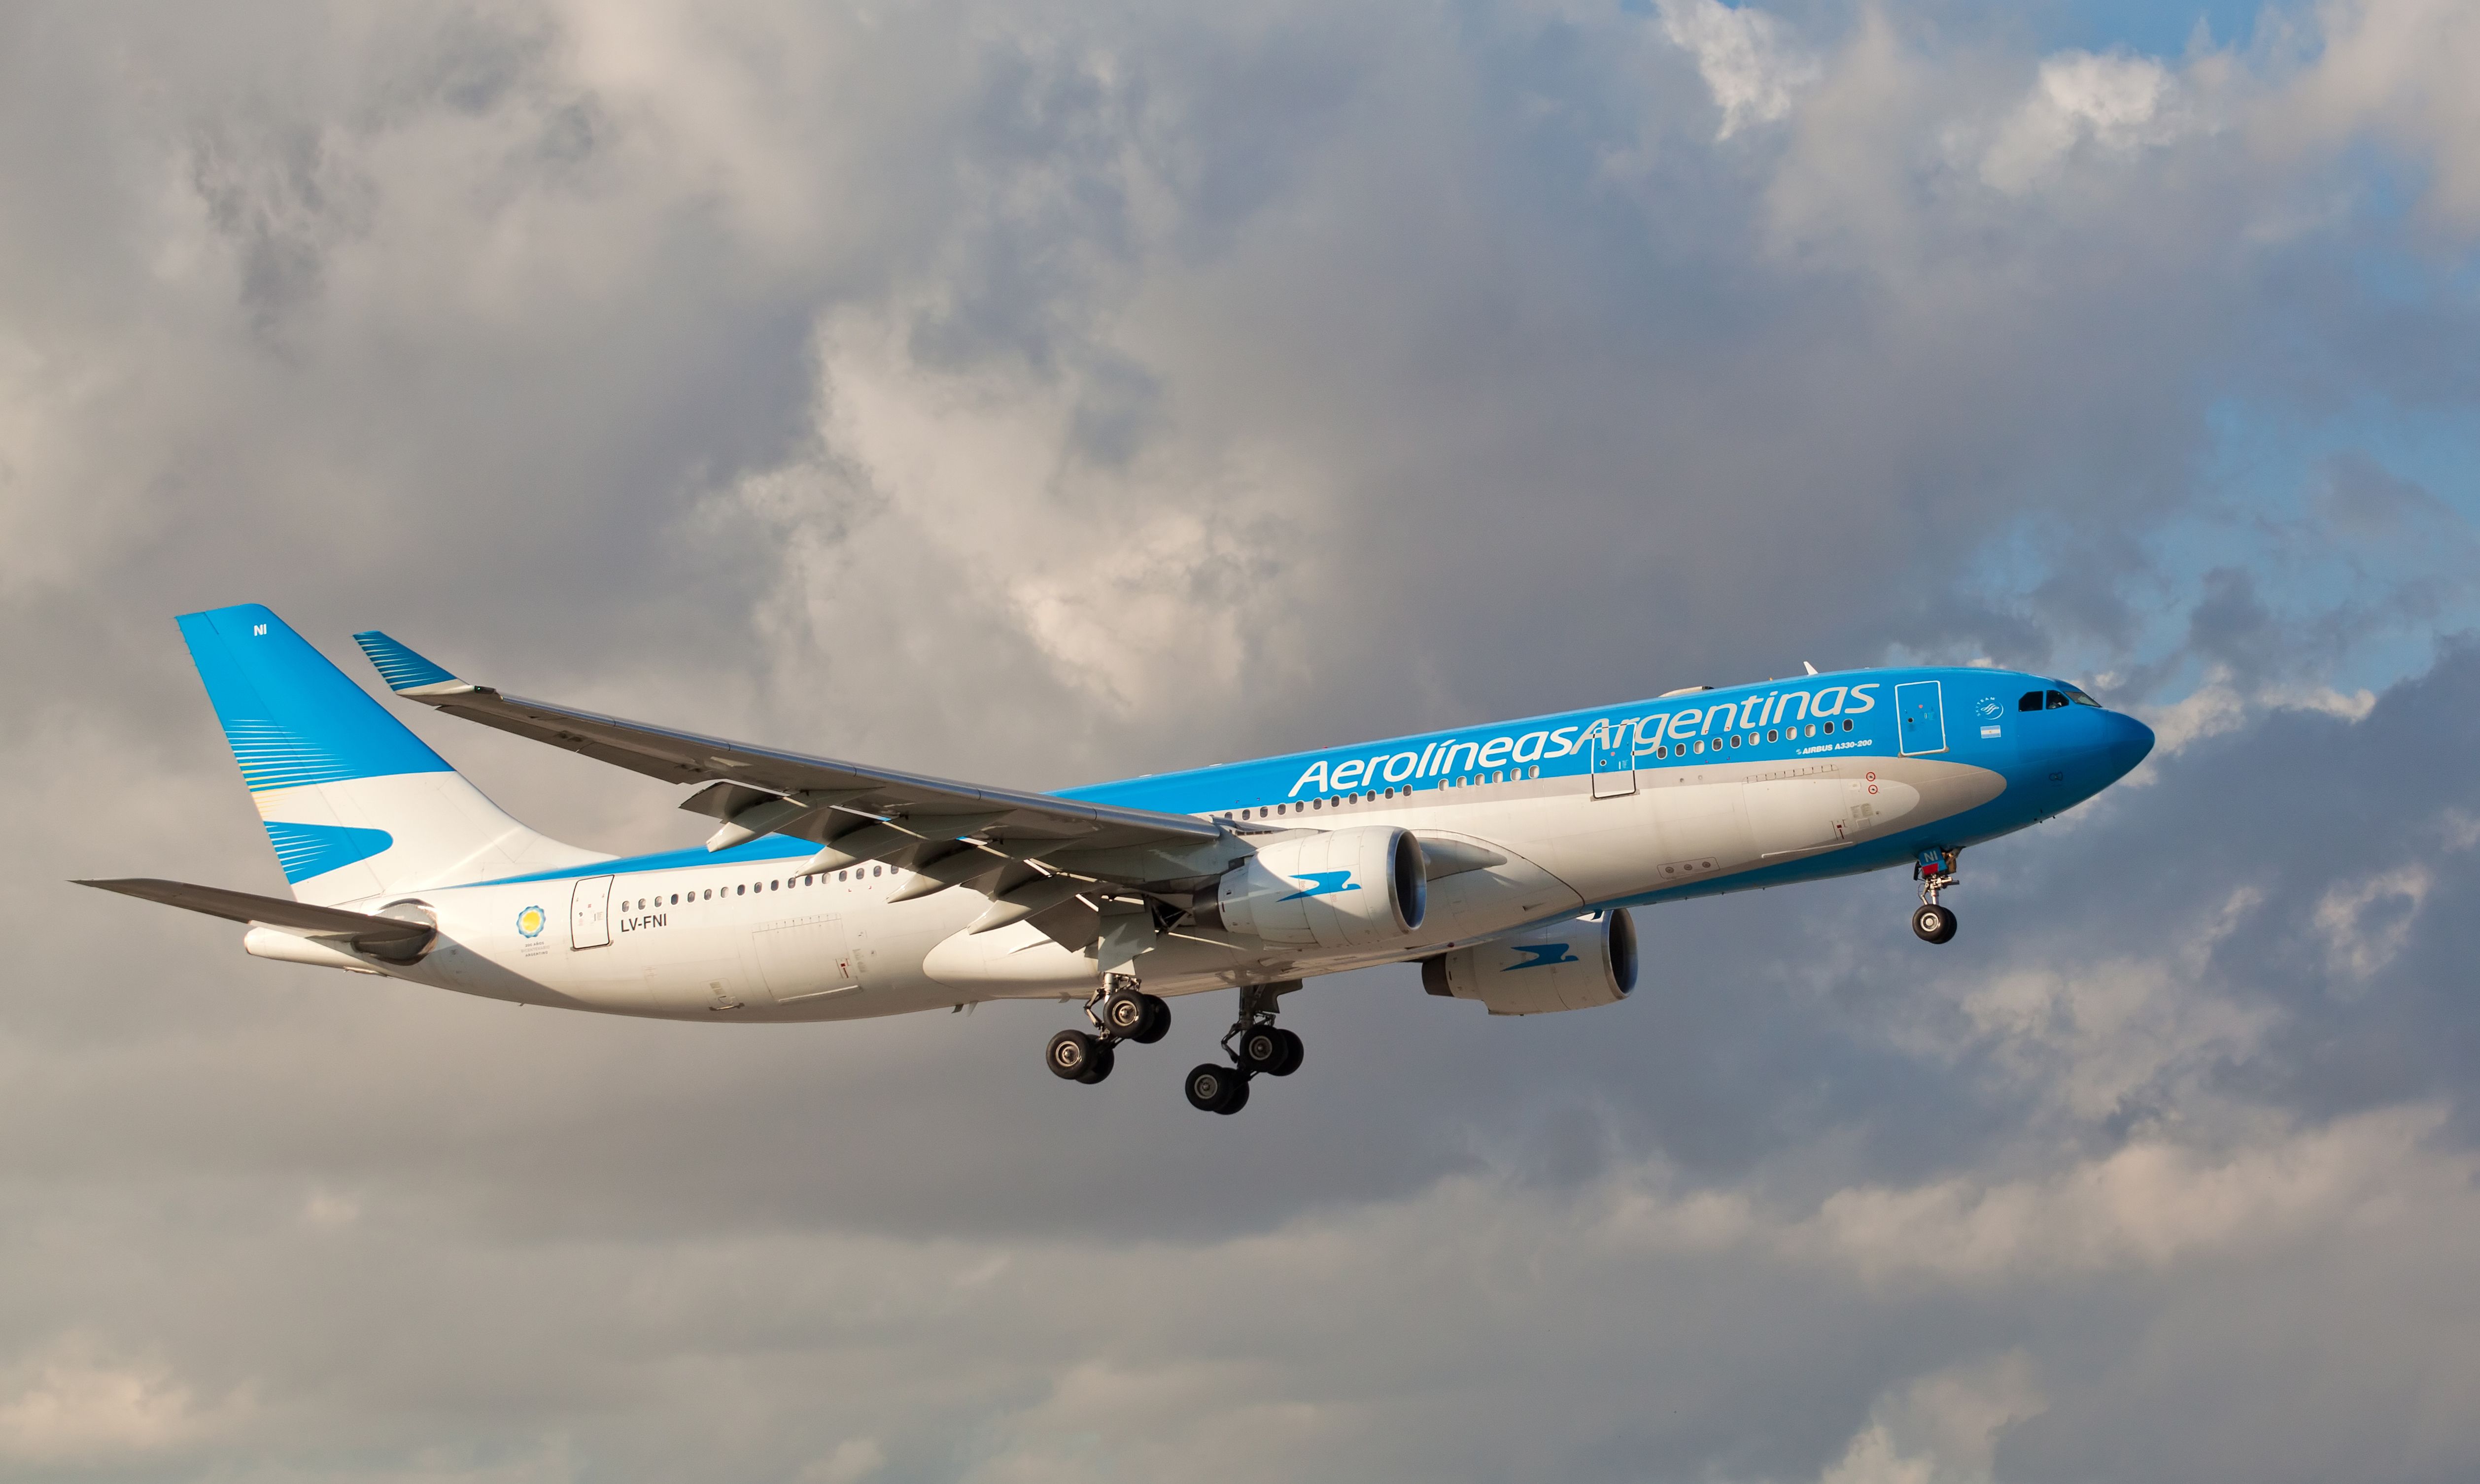 An Aerolineas Argentinas Airbus-330 flying in the sky.